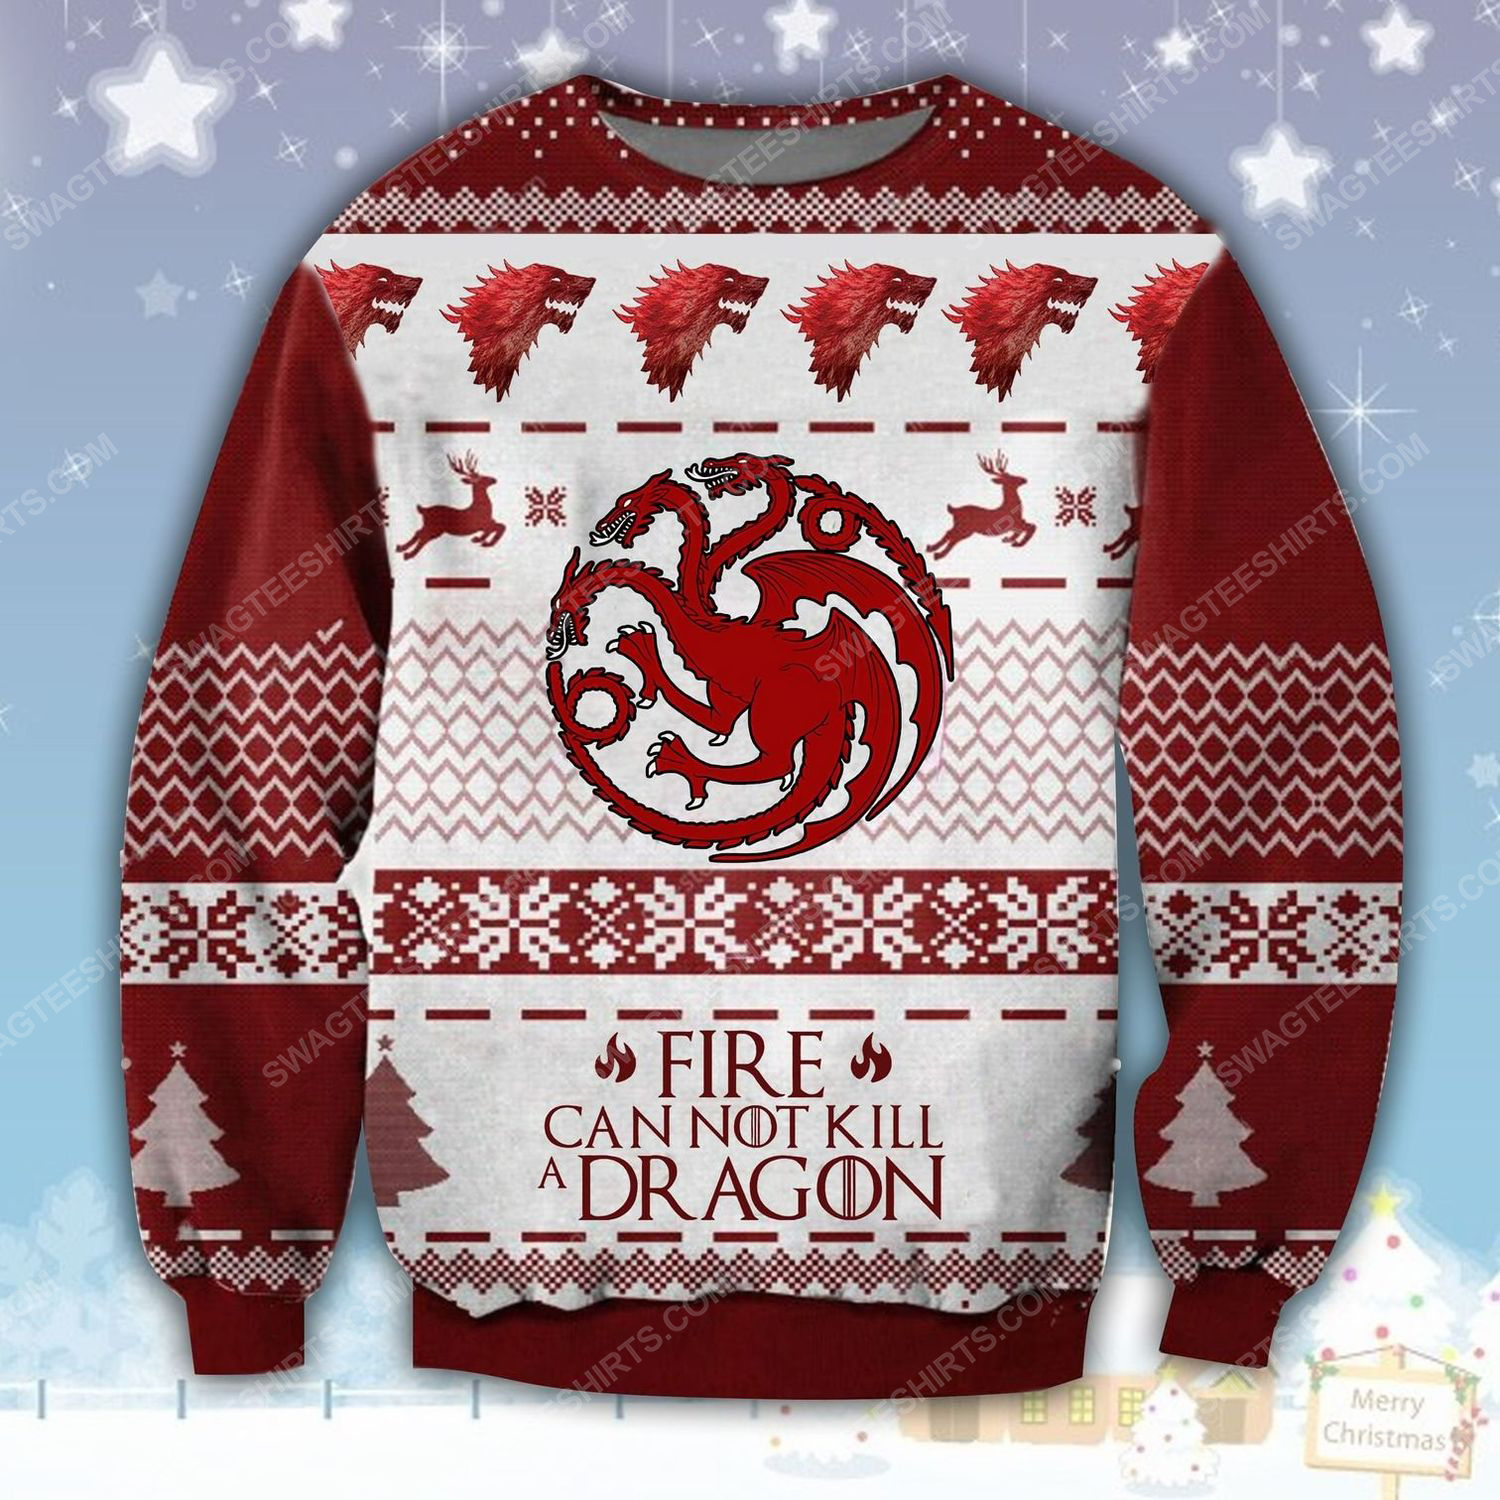 Game of thrones fire cannot kill a dragon ugly christmas sweater